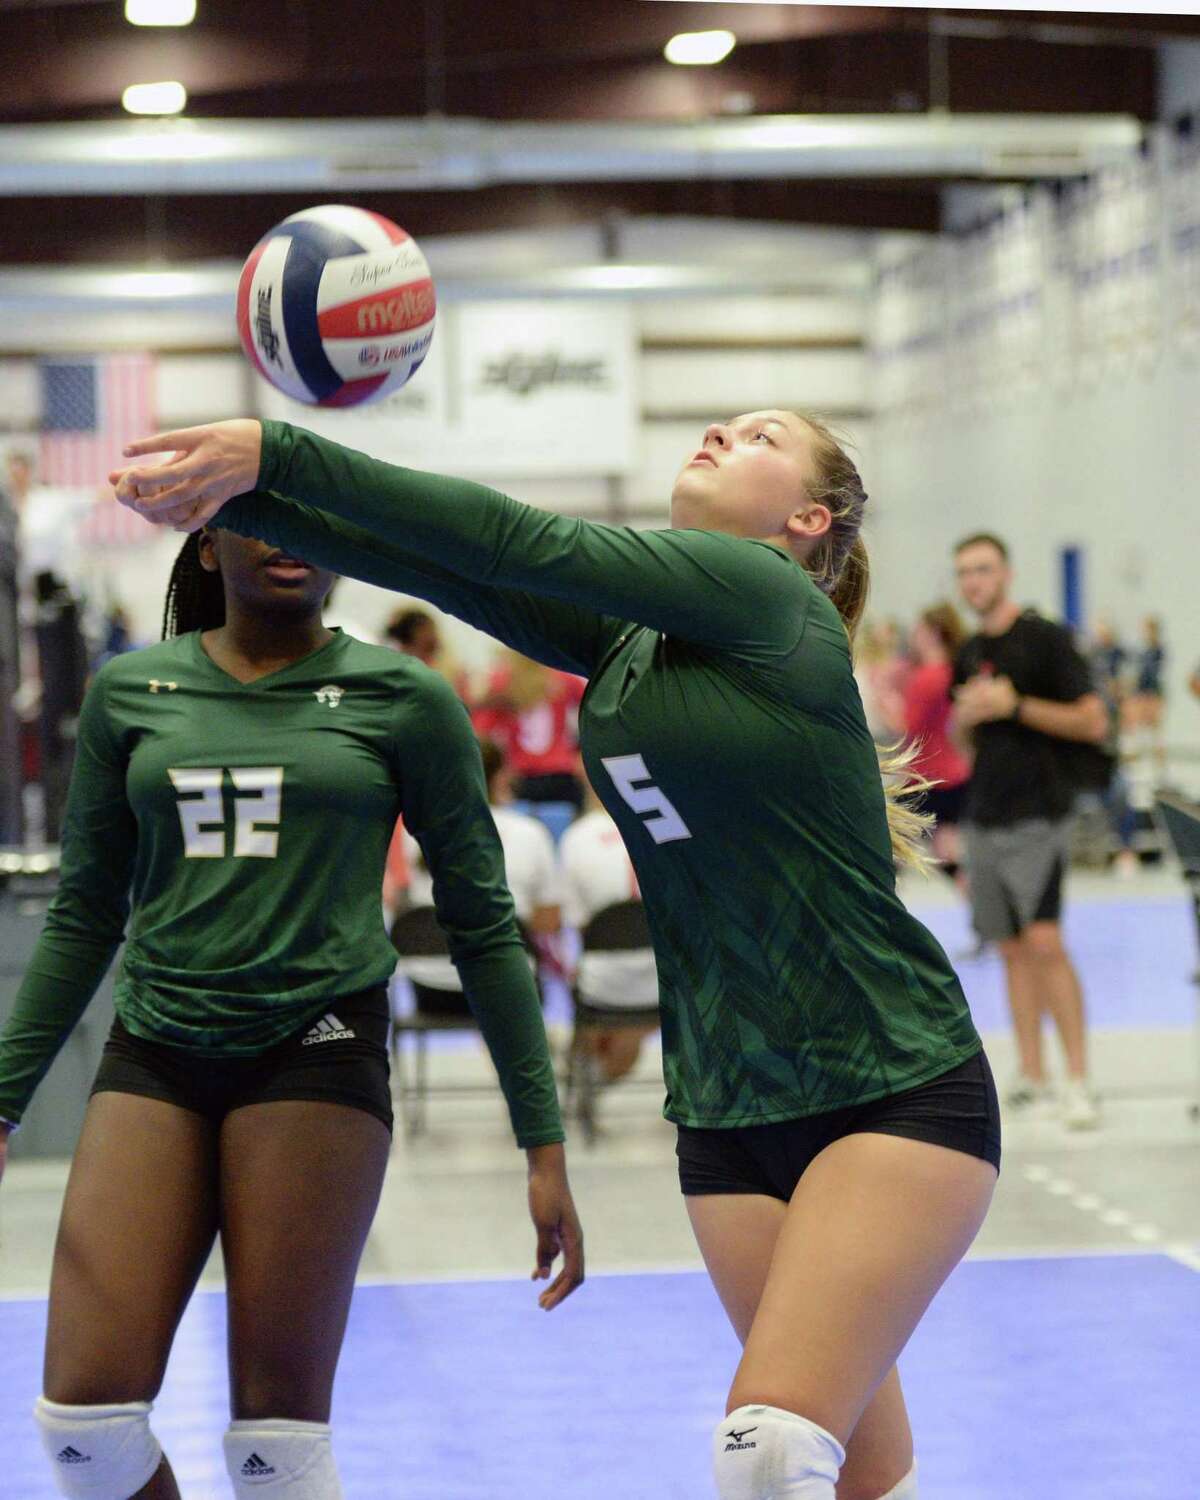 Teddy Laughton (5) of Awty digs for a ball during the first set of a volleyball match between the Awty International Rams and the Woodlands Christian Warriors on Friday, August 23, 2019 at Skyline Juniors, Houston, TX.